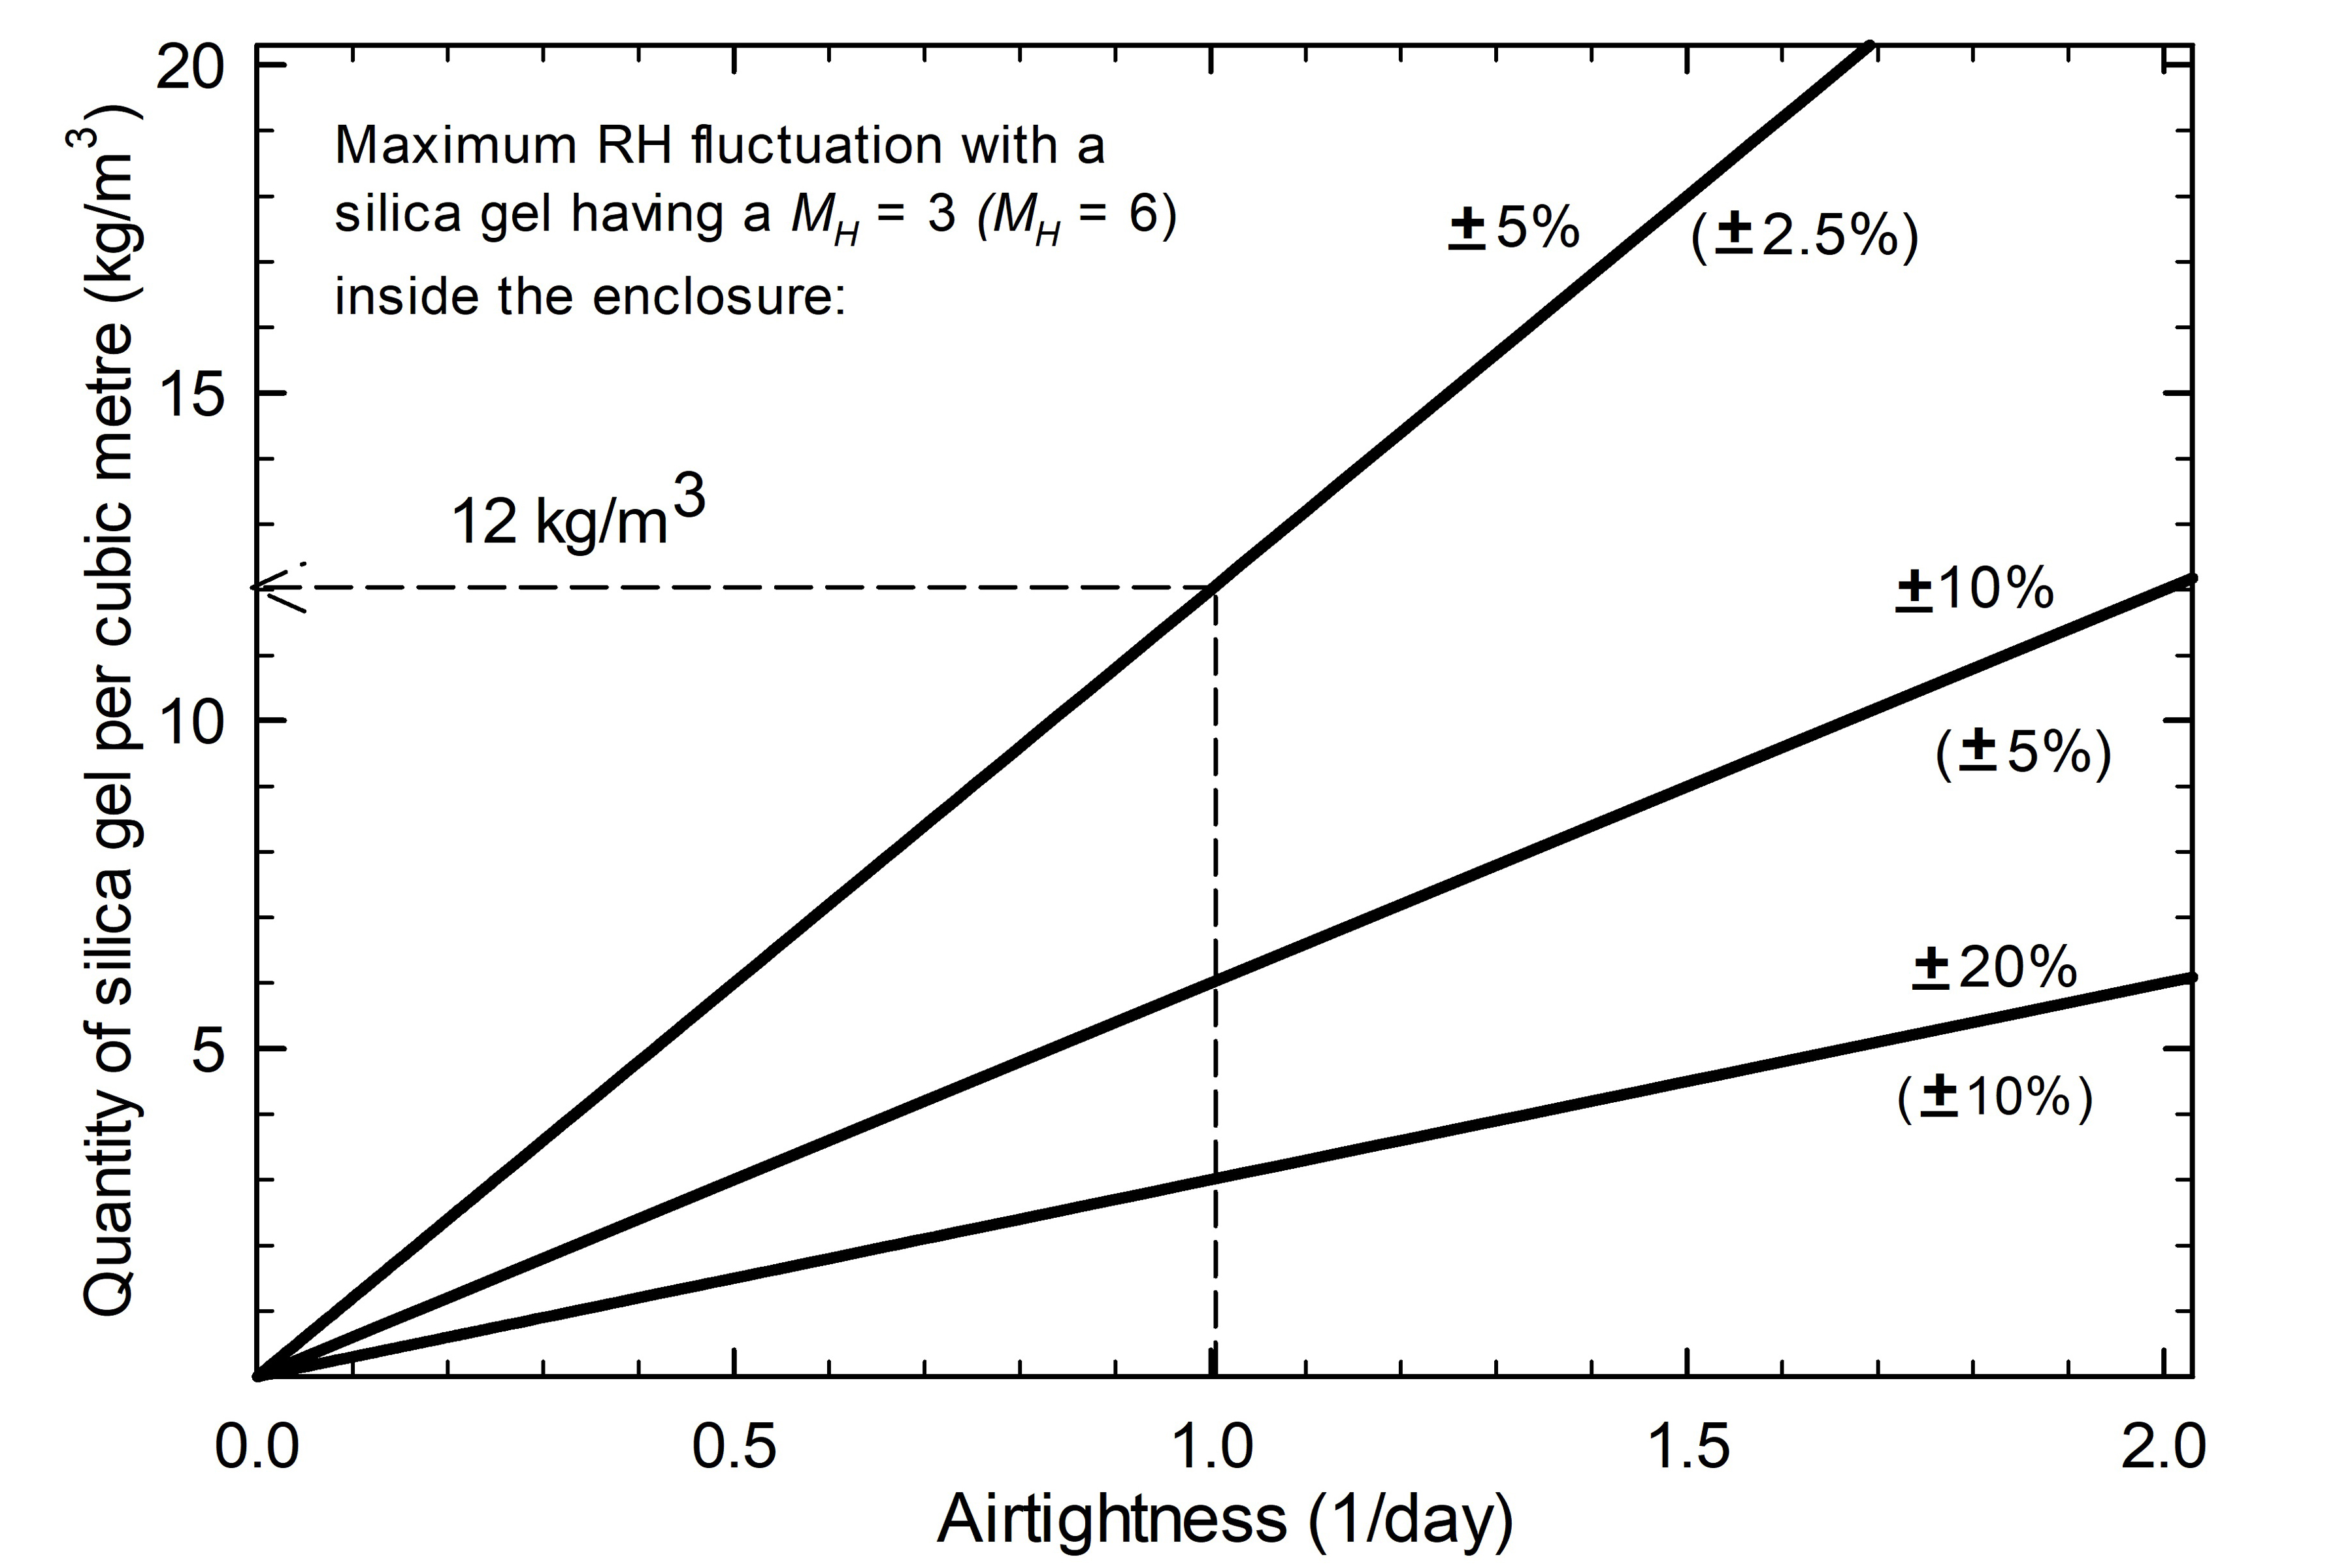 Graph showing the amount of silica gel required to maintain stable RH conditions over an annual cycle according to Equation 1